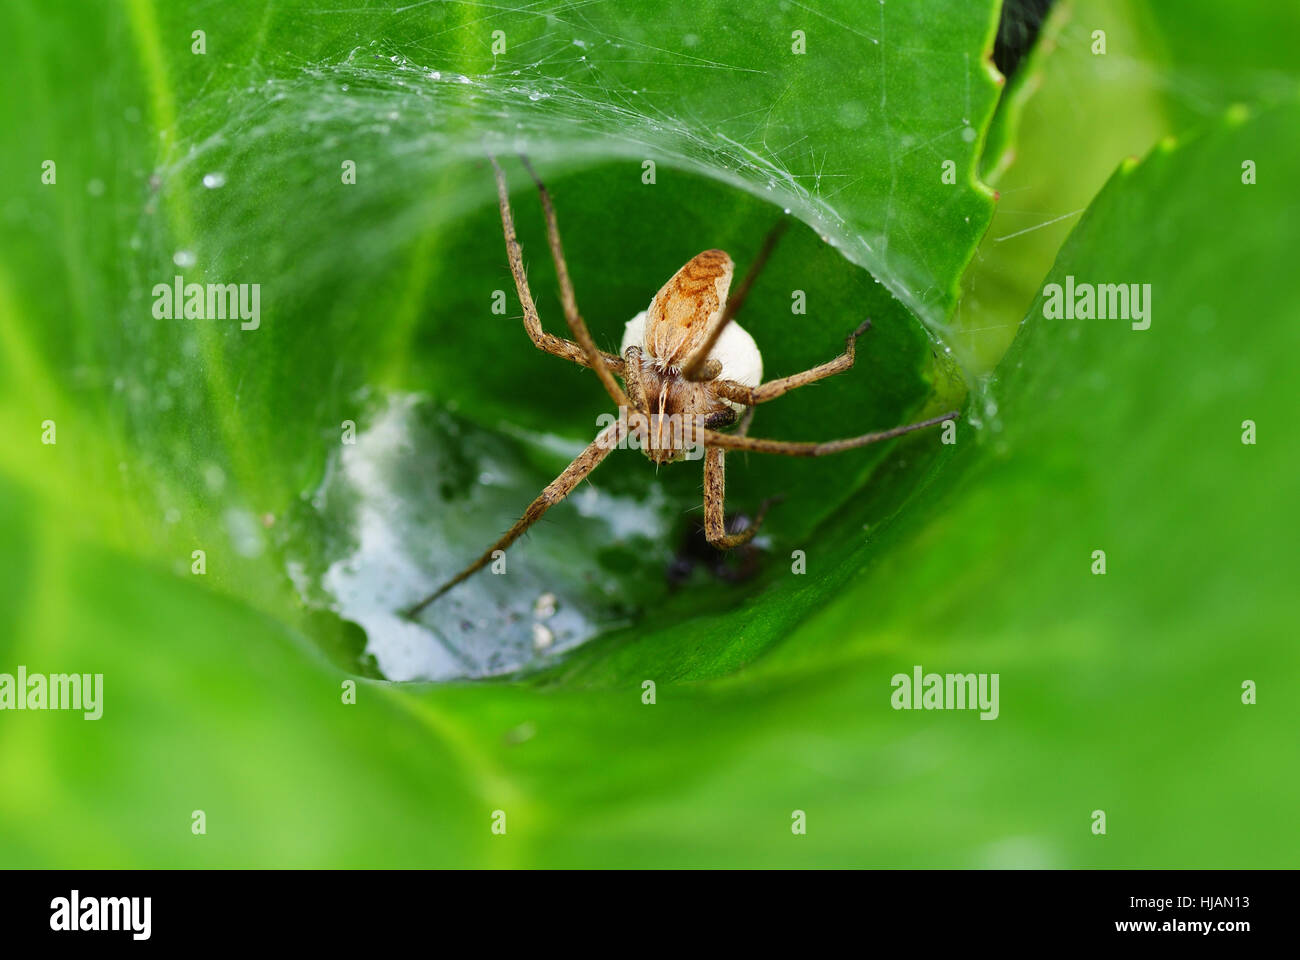 leaf, animal, insect, spider, reproduction, terrible, spiderweb, replication, Stock Photo